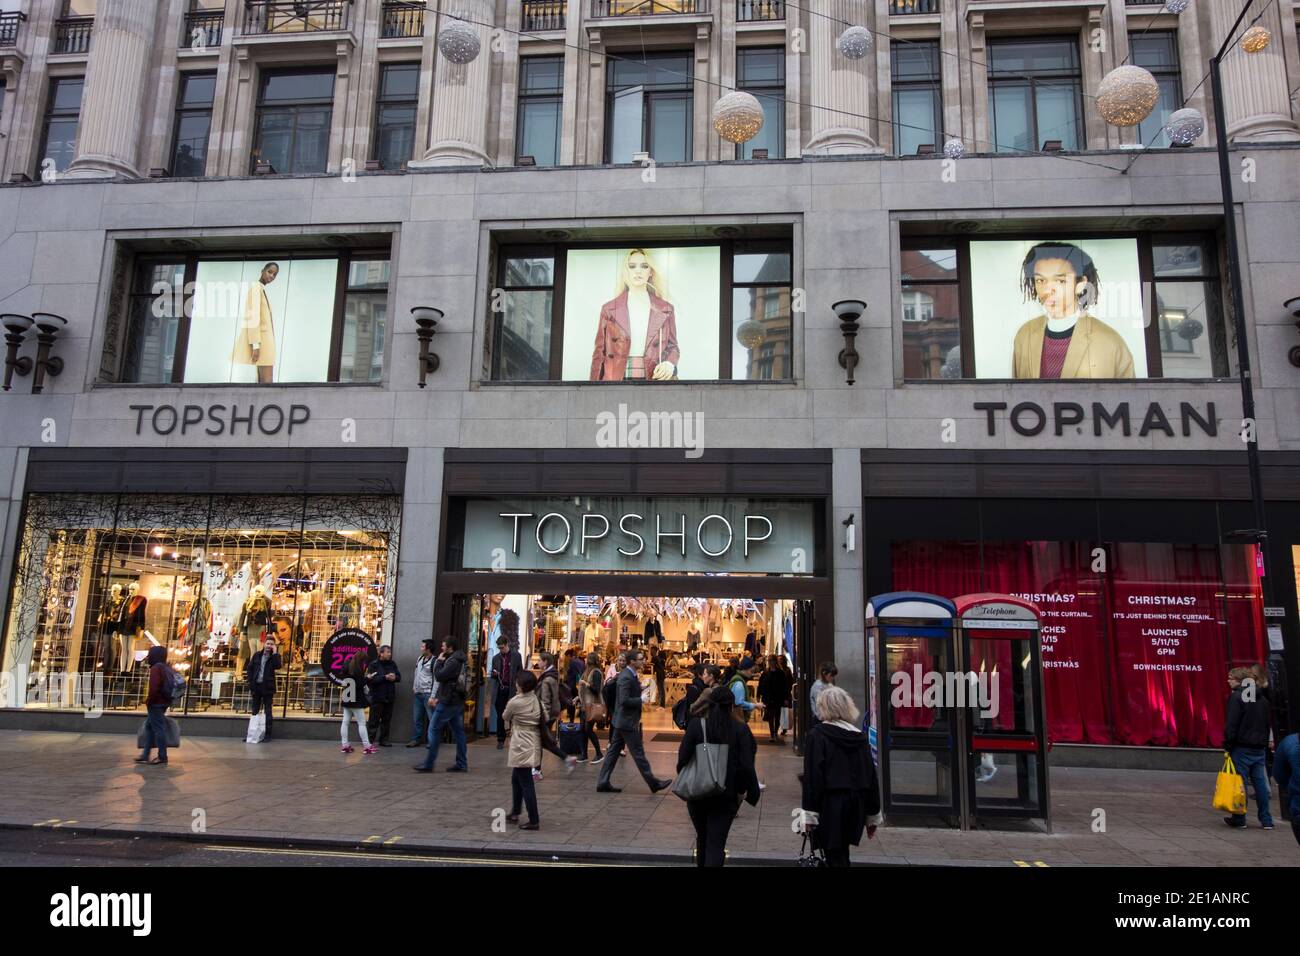 Topshop Shop in Oxford Street London GB Europe Stock Photo